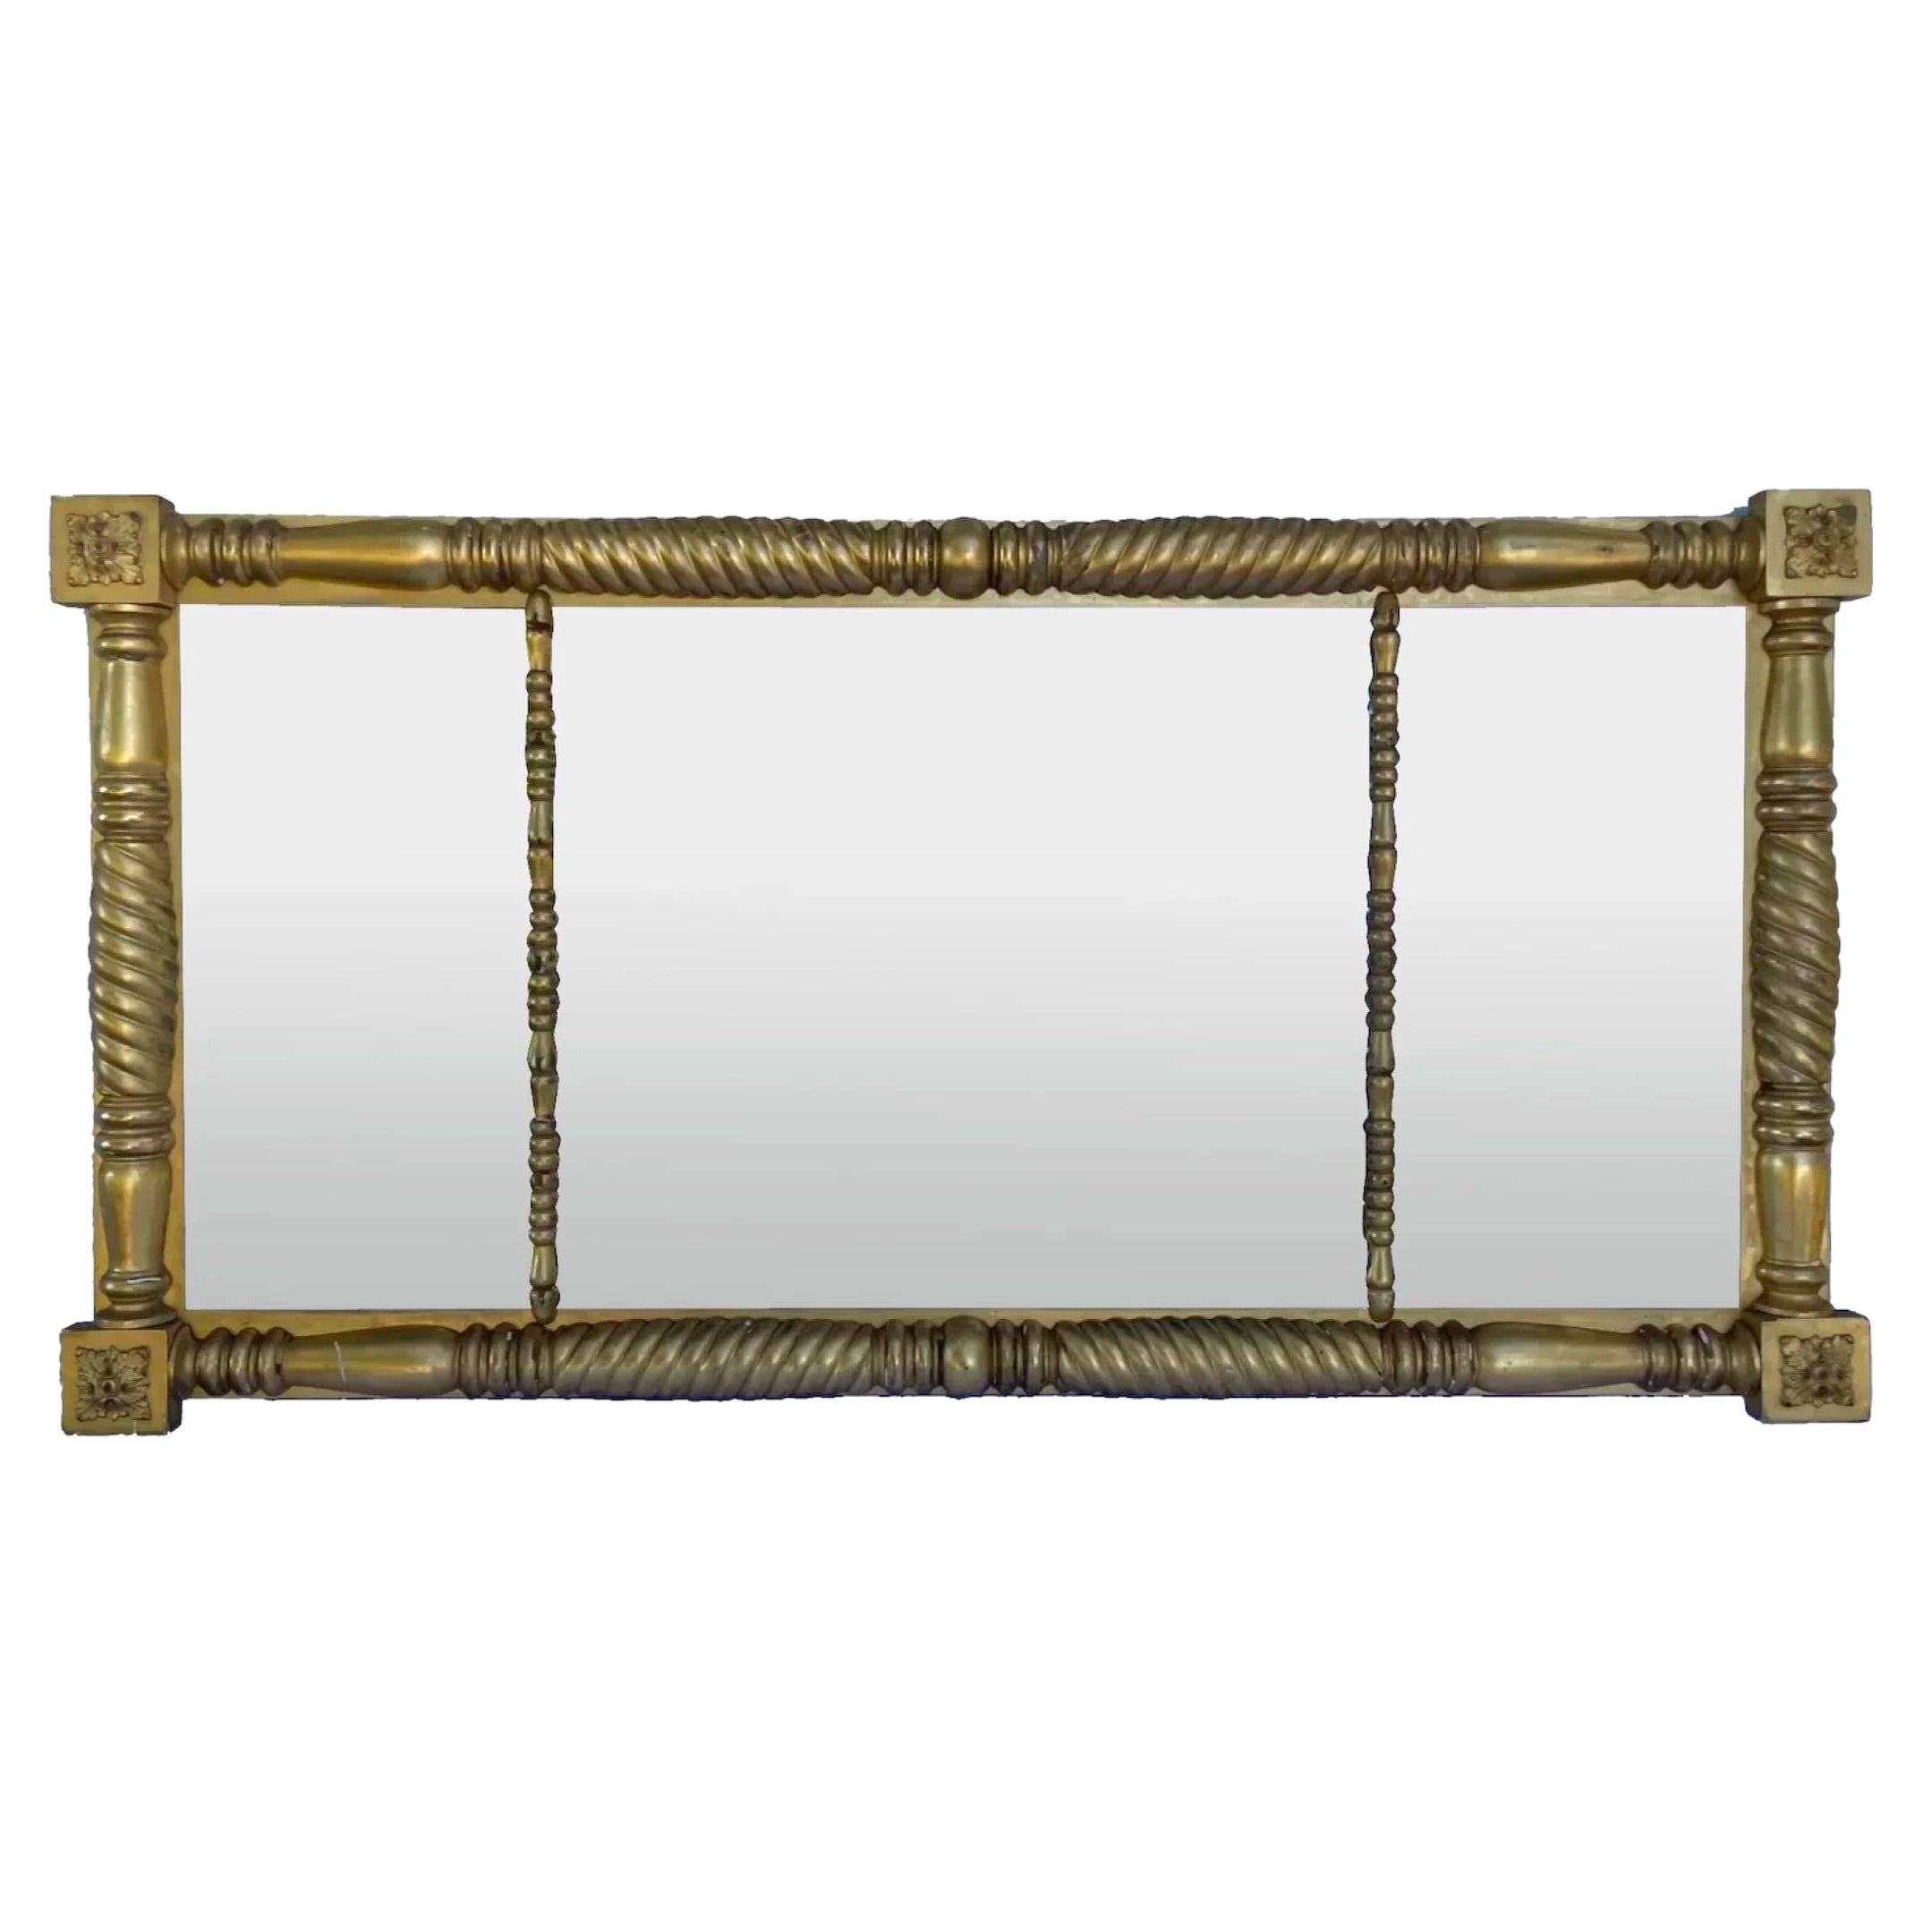 19th Century Large American Empire Gilt Wood Carved Overmantle Mirror ca. 1840 For Sale